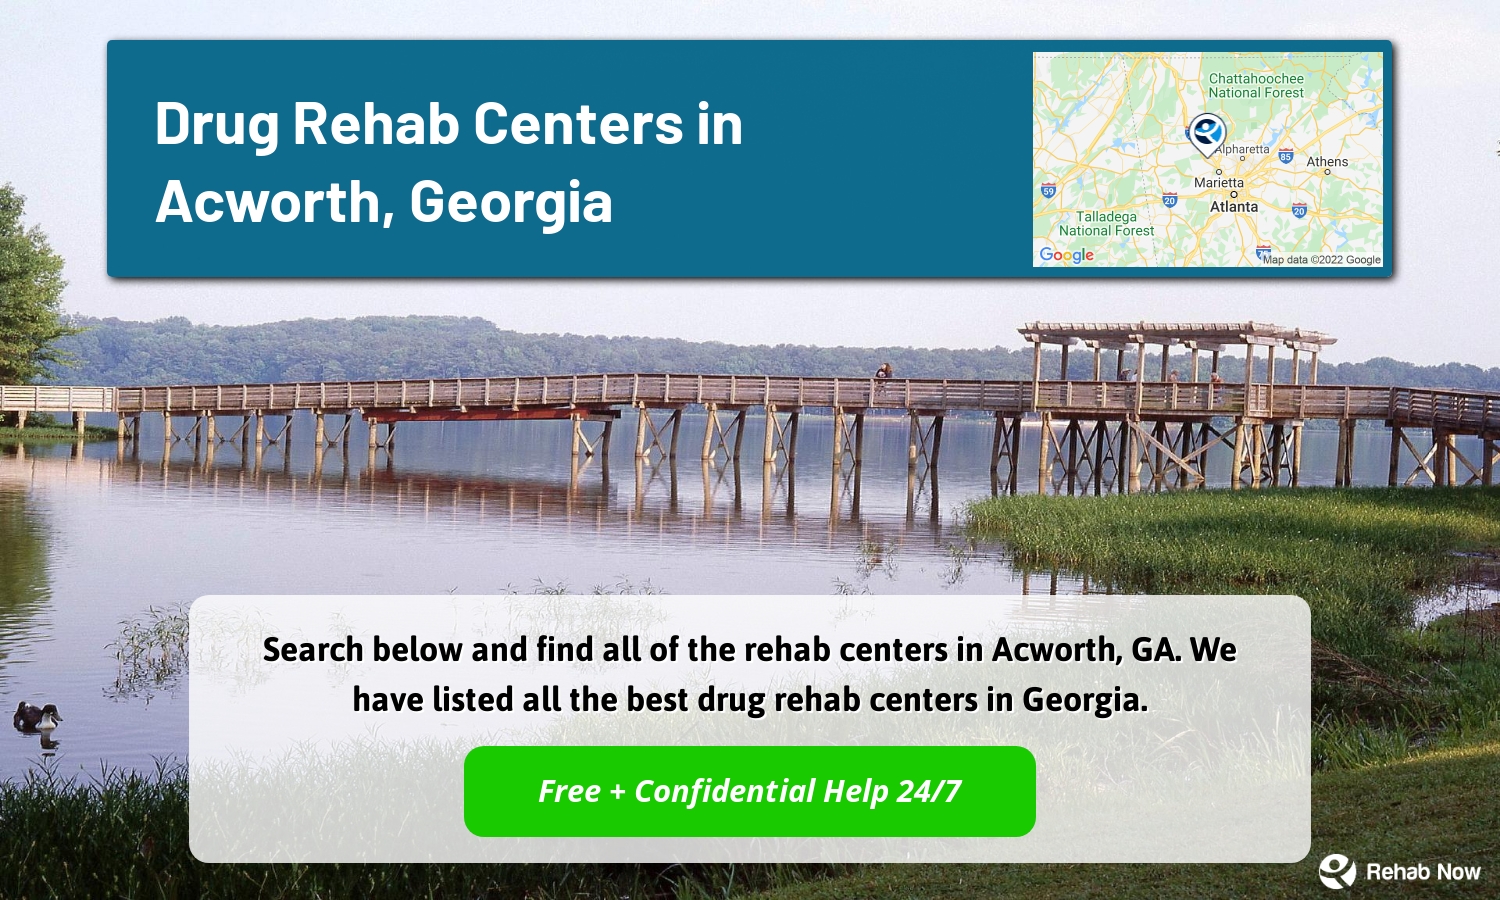 Search below and find all of the rehab centers in Acworth, GA. We have listed all the best drug rehab centers in Georgia.